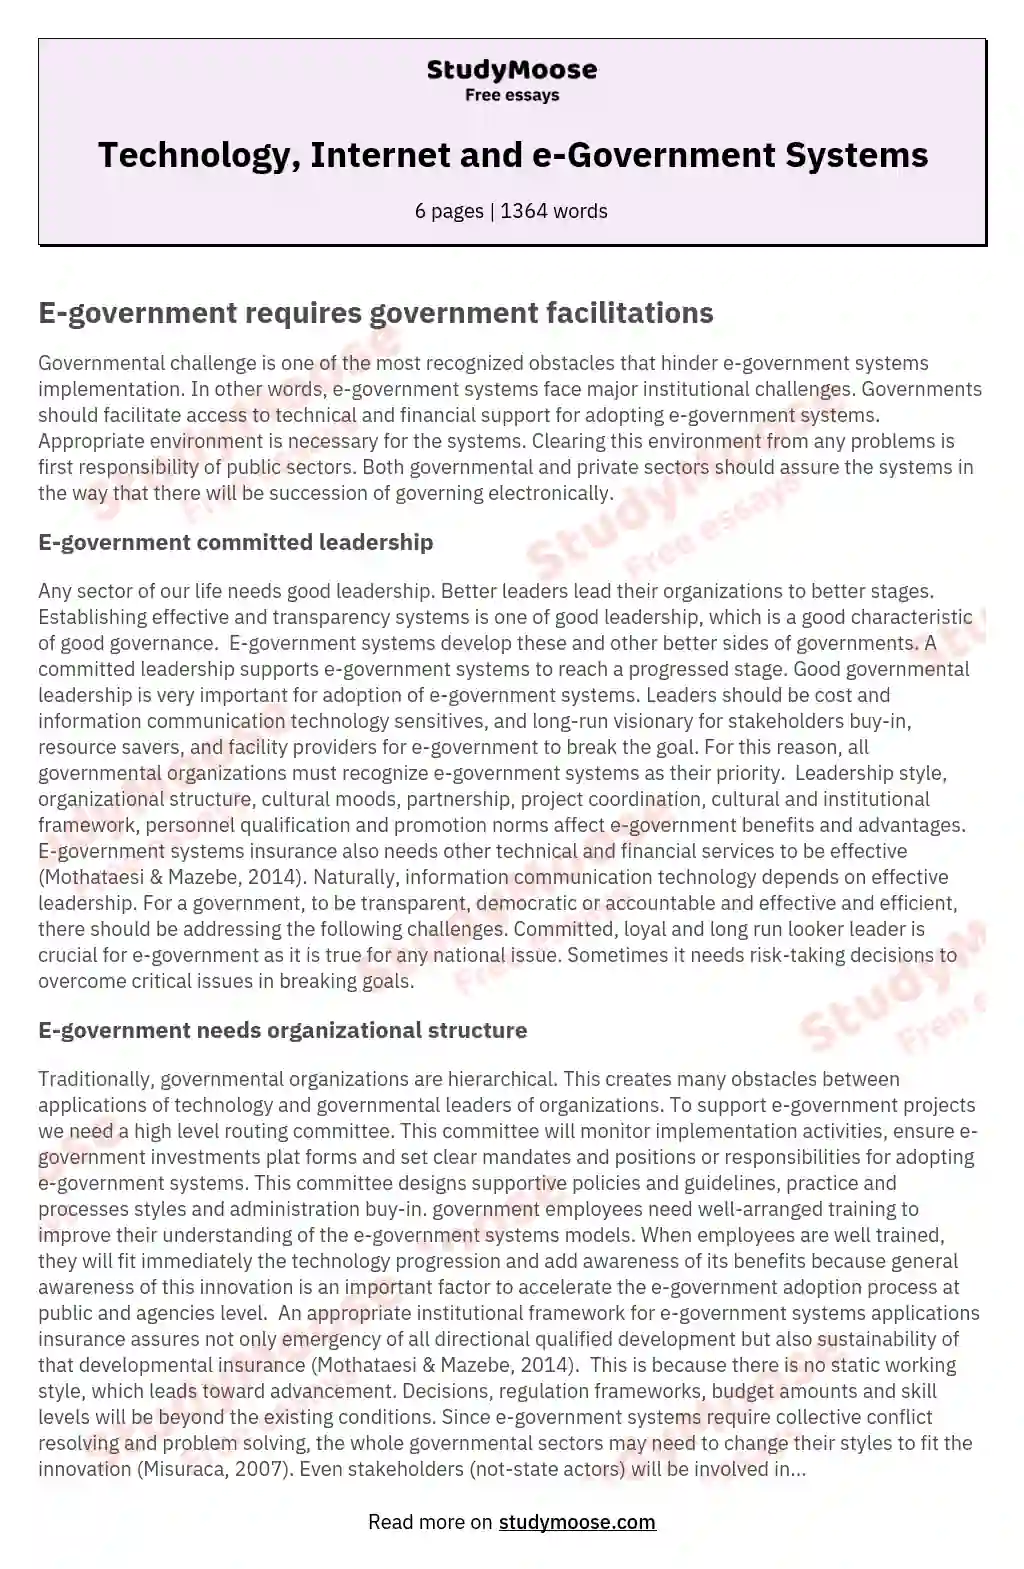 Technology, Internet and e-Government Systems essay